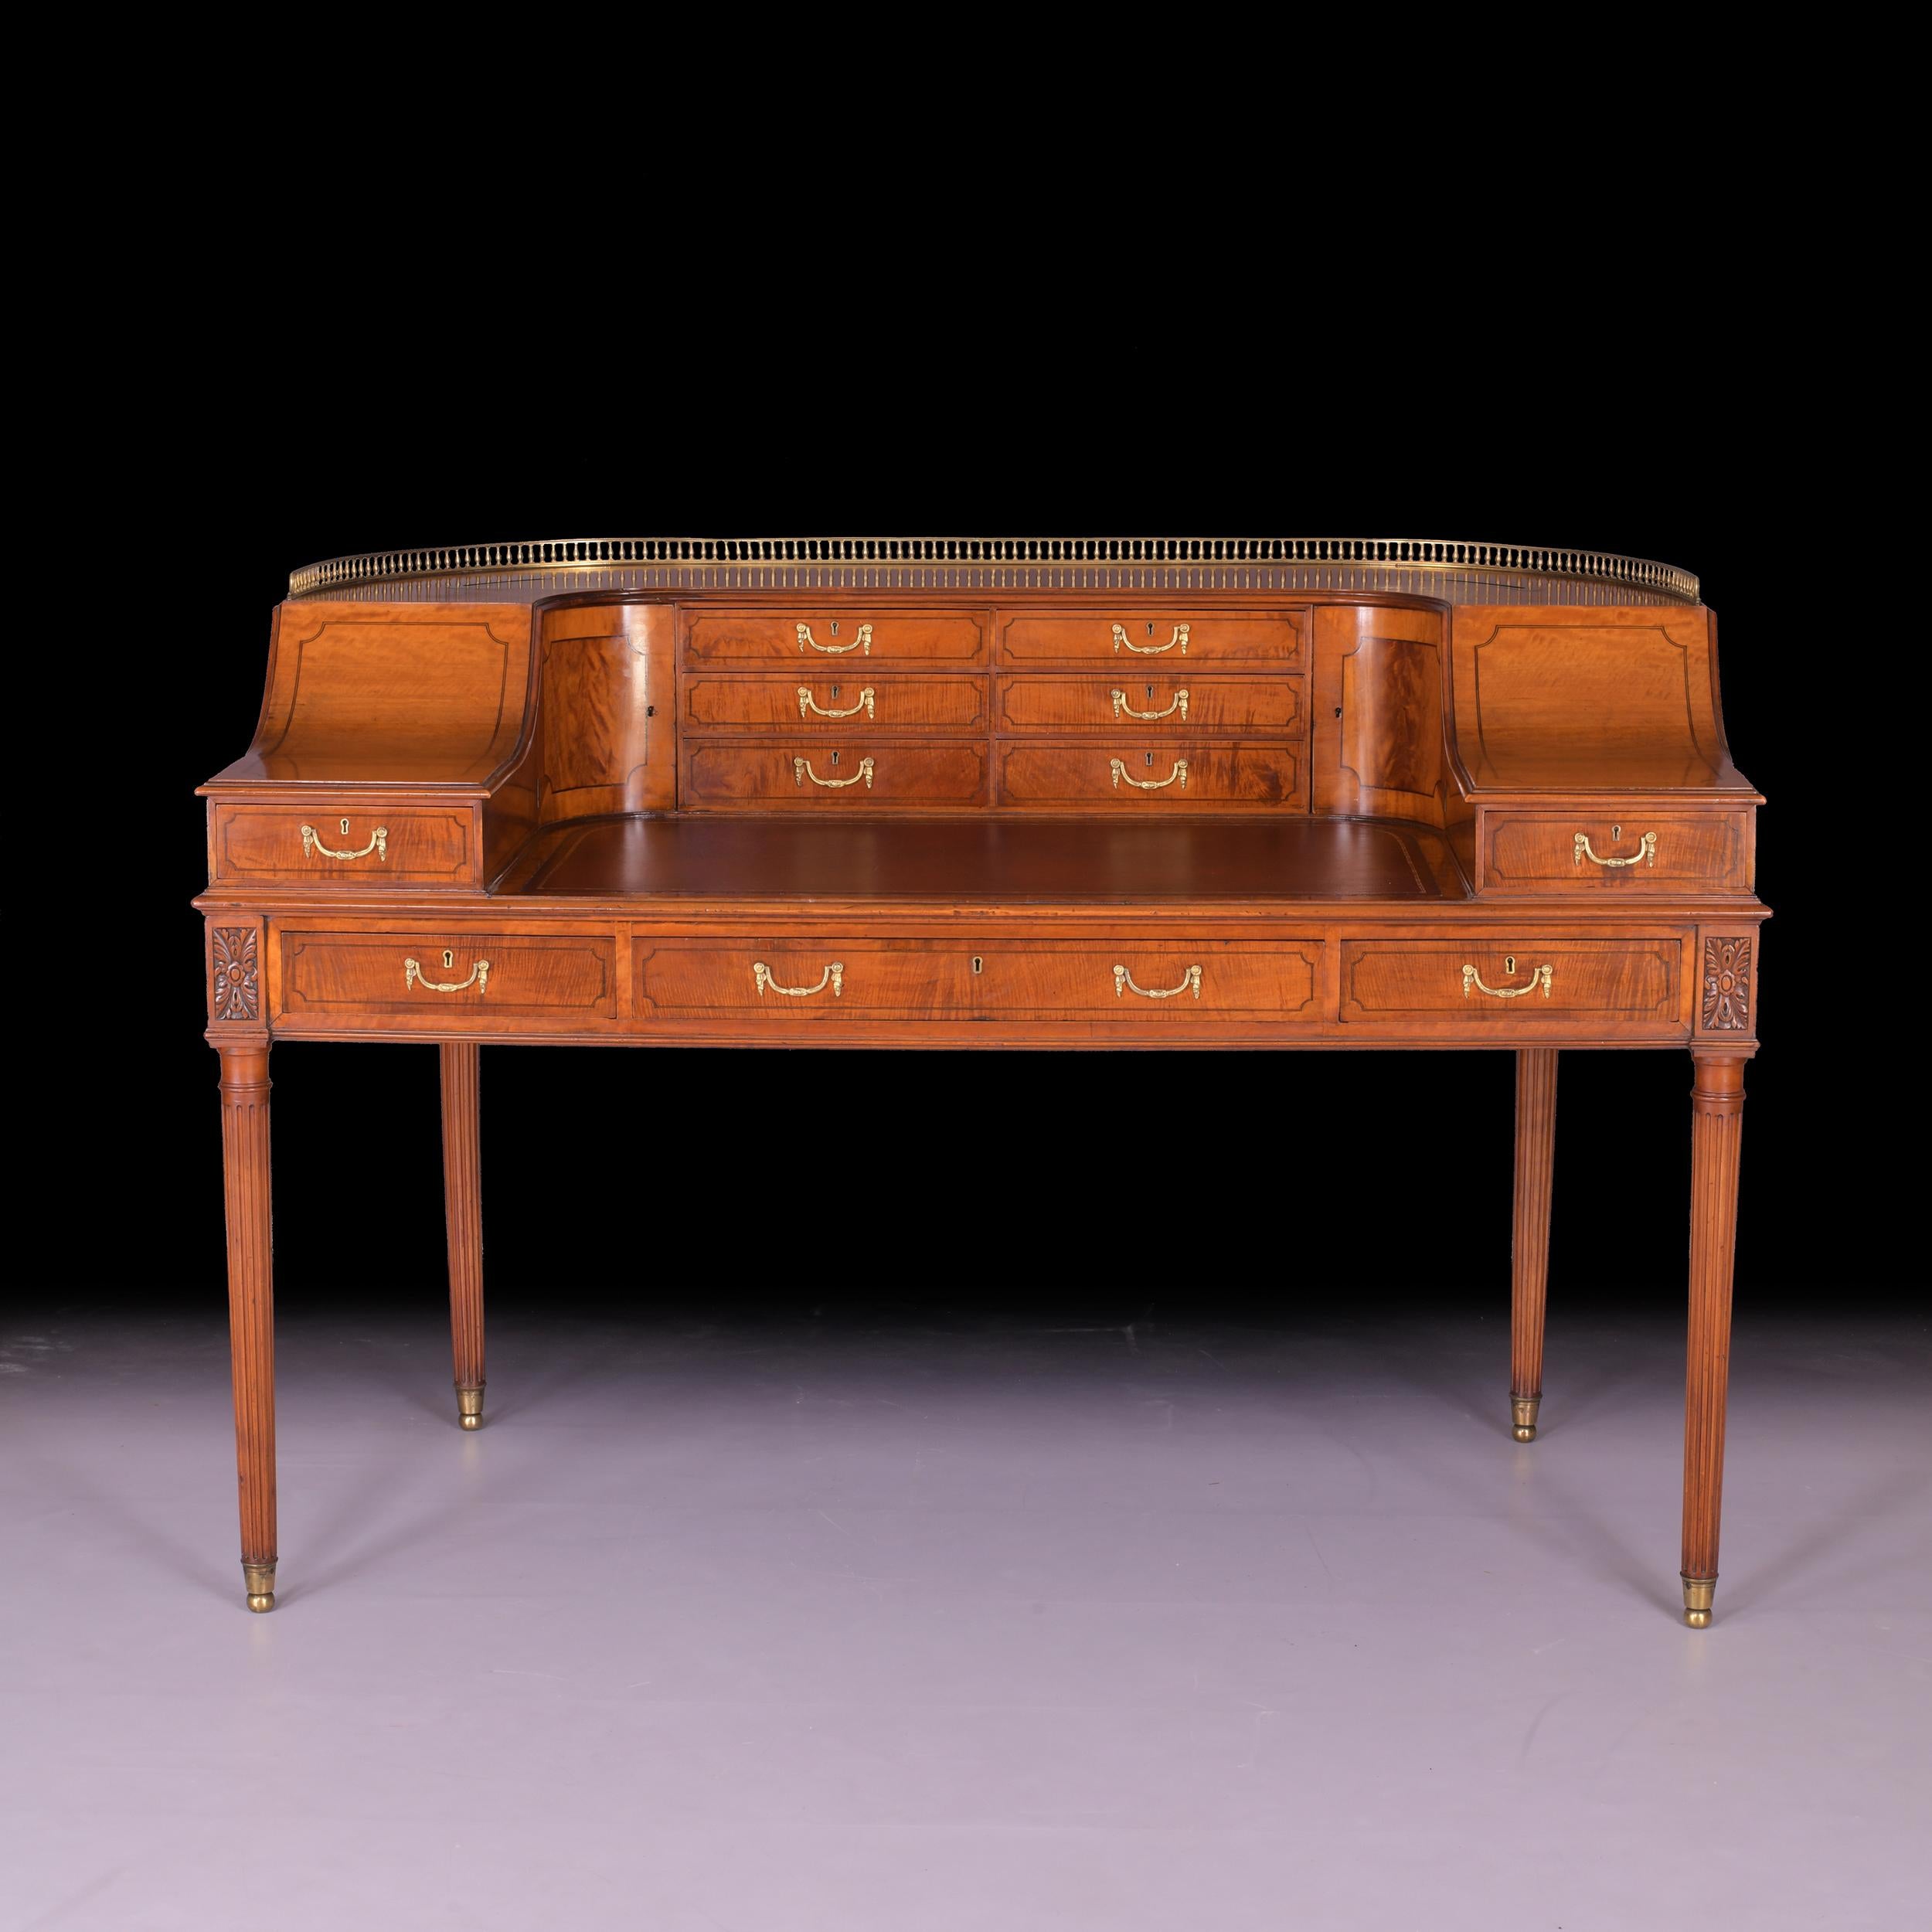 19th Century English Satinwood Carlton House Desk Attributed to Gillows For Sale 3